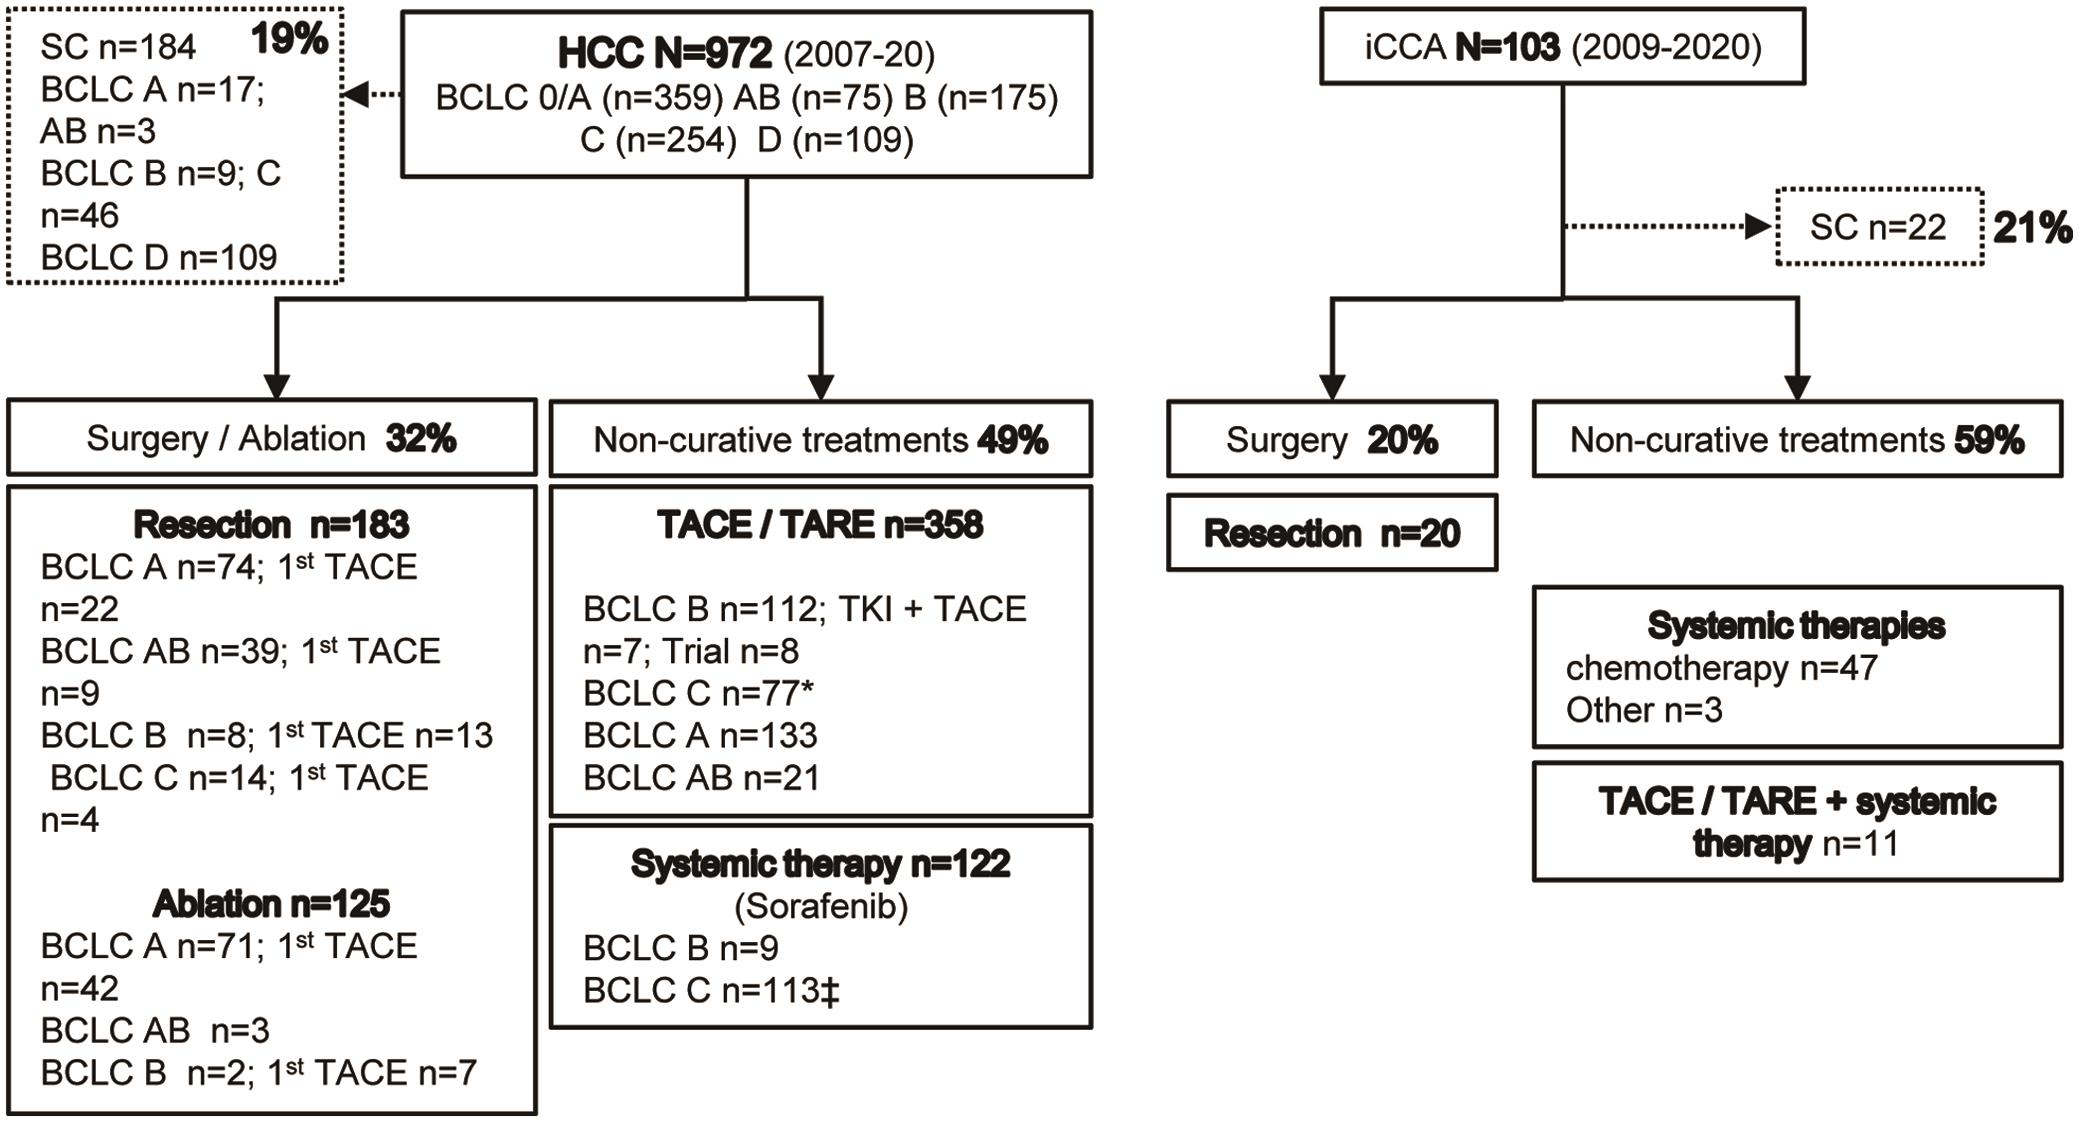 First-line treatment modalities in patients with HCC or iCCA.